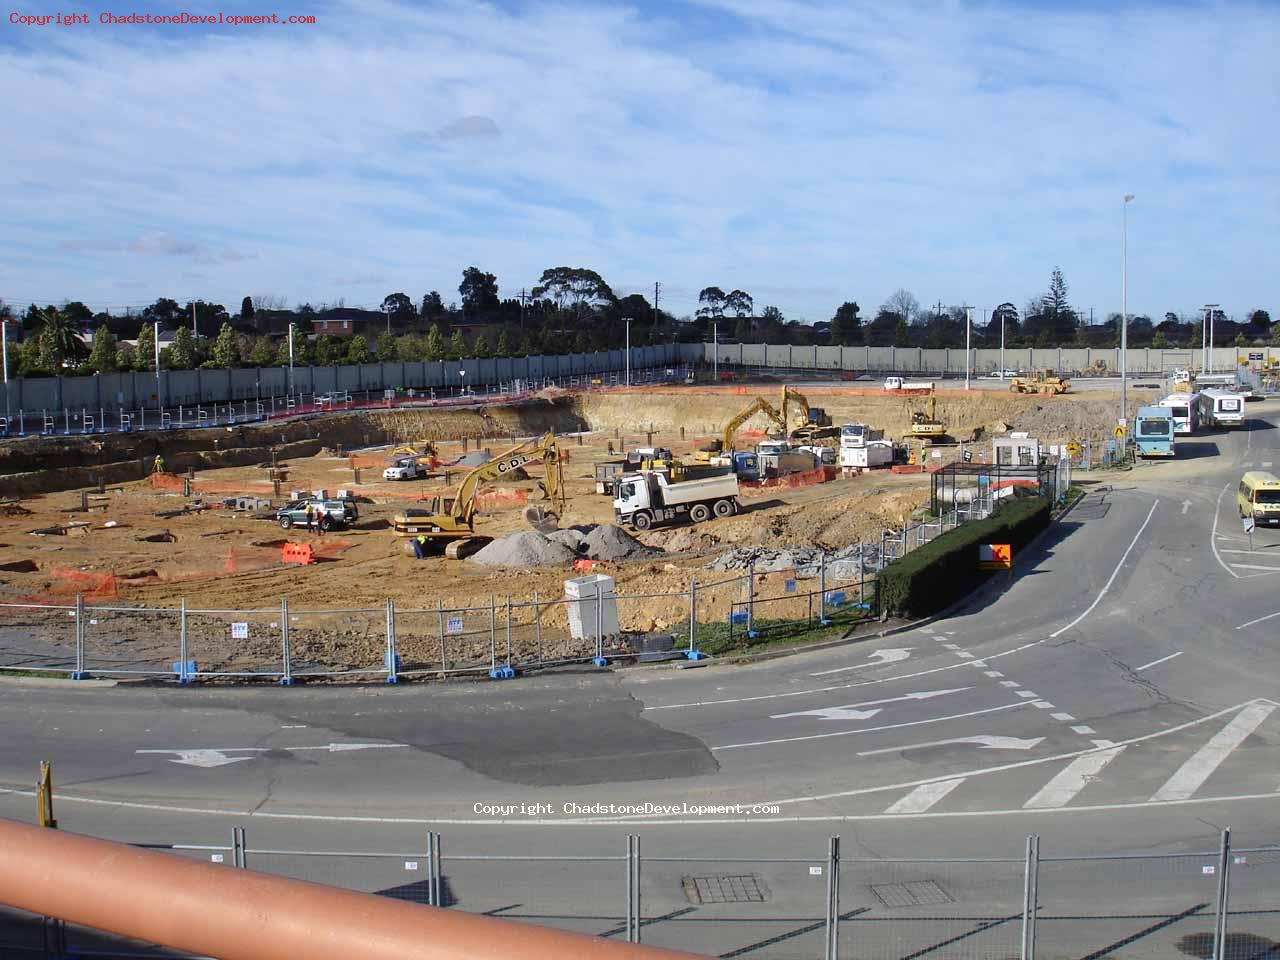 Overview of carpark construction - Chadstone Development Discussions Gallery